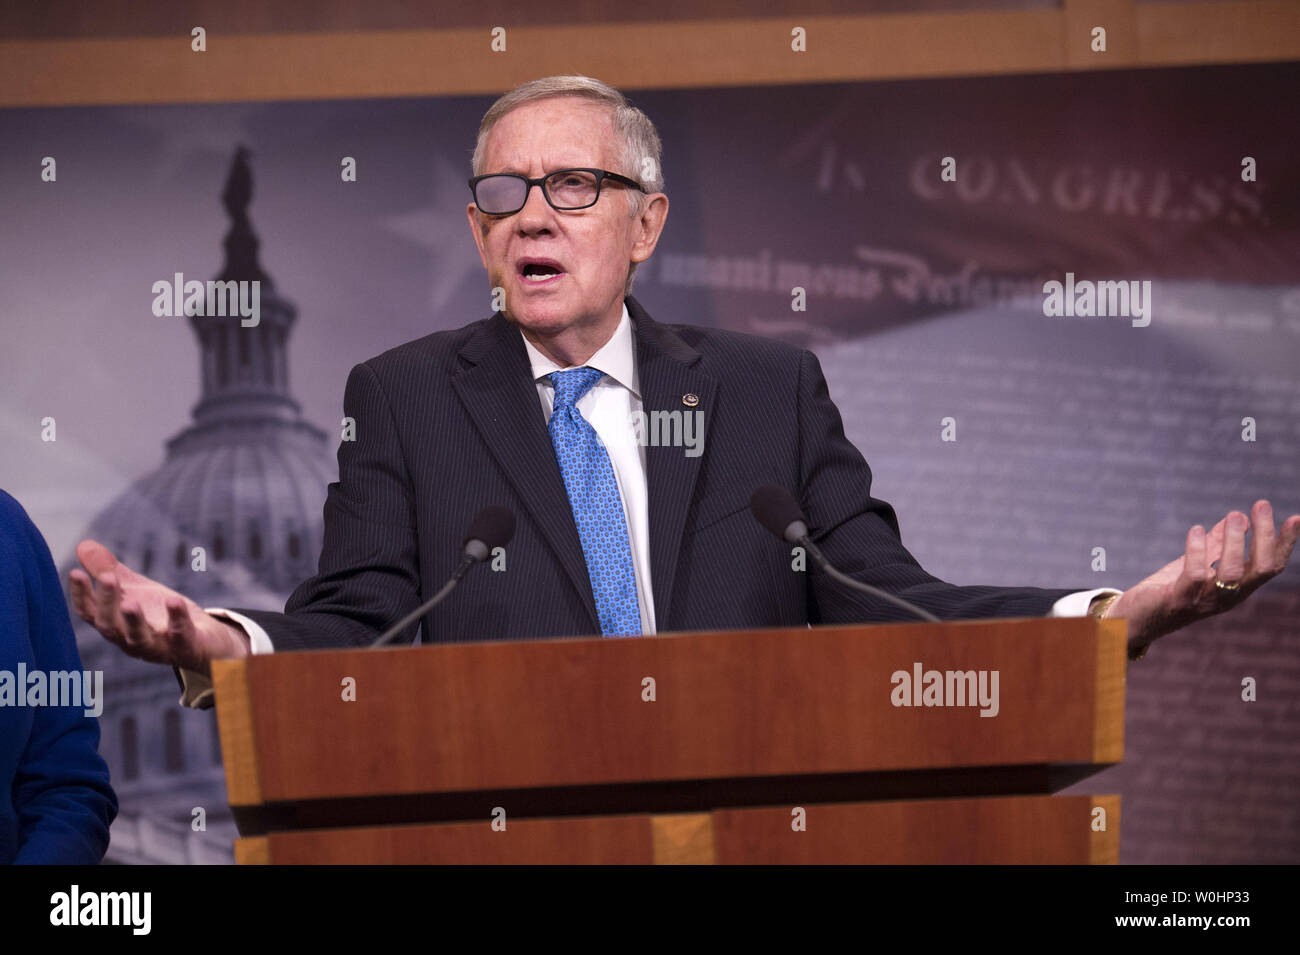 Senate Majority Leader Harry Reid speaks on the ongoing Department of Homeland Security (DHS) funding debate on Capitol Hill in Washington, D.C. on February 26, 2015. House Republicans are holding up funding to DHS in protest of President Obama's executive order on immigration. Photo by Kevin Dietsch/UPI Stock Photo